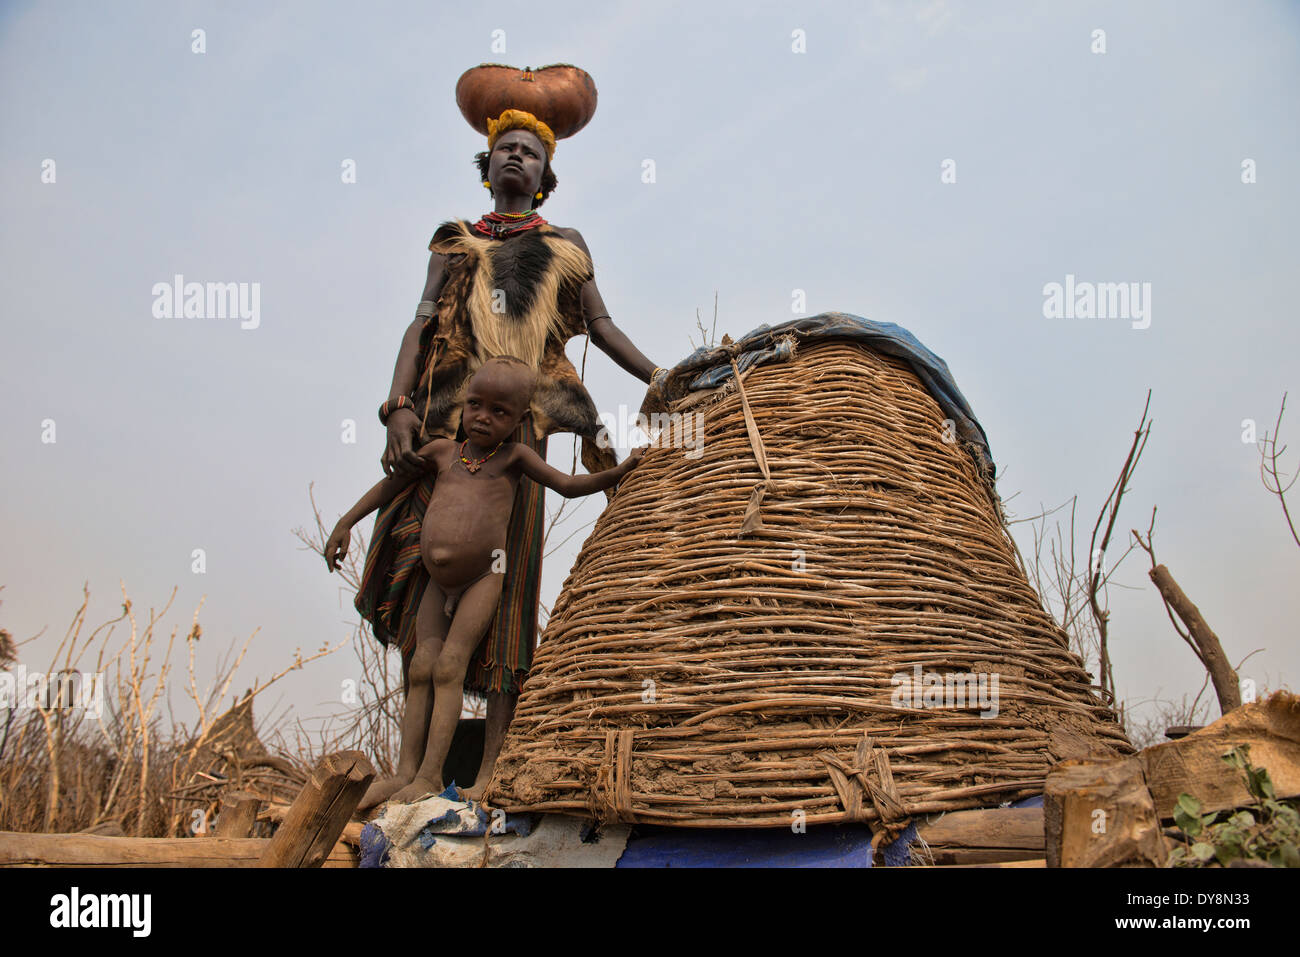 Dassanech woman and her child, Lower Omo Valley of Ethiopia Stock Photo